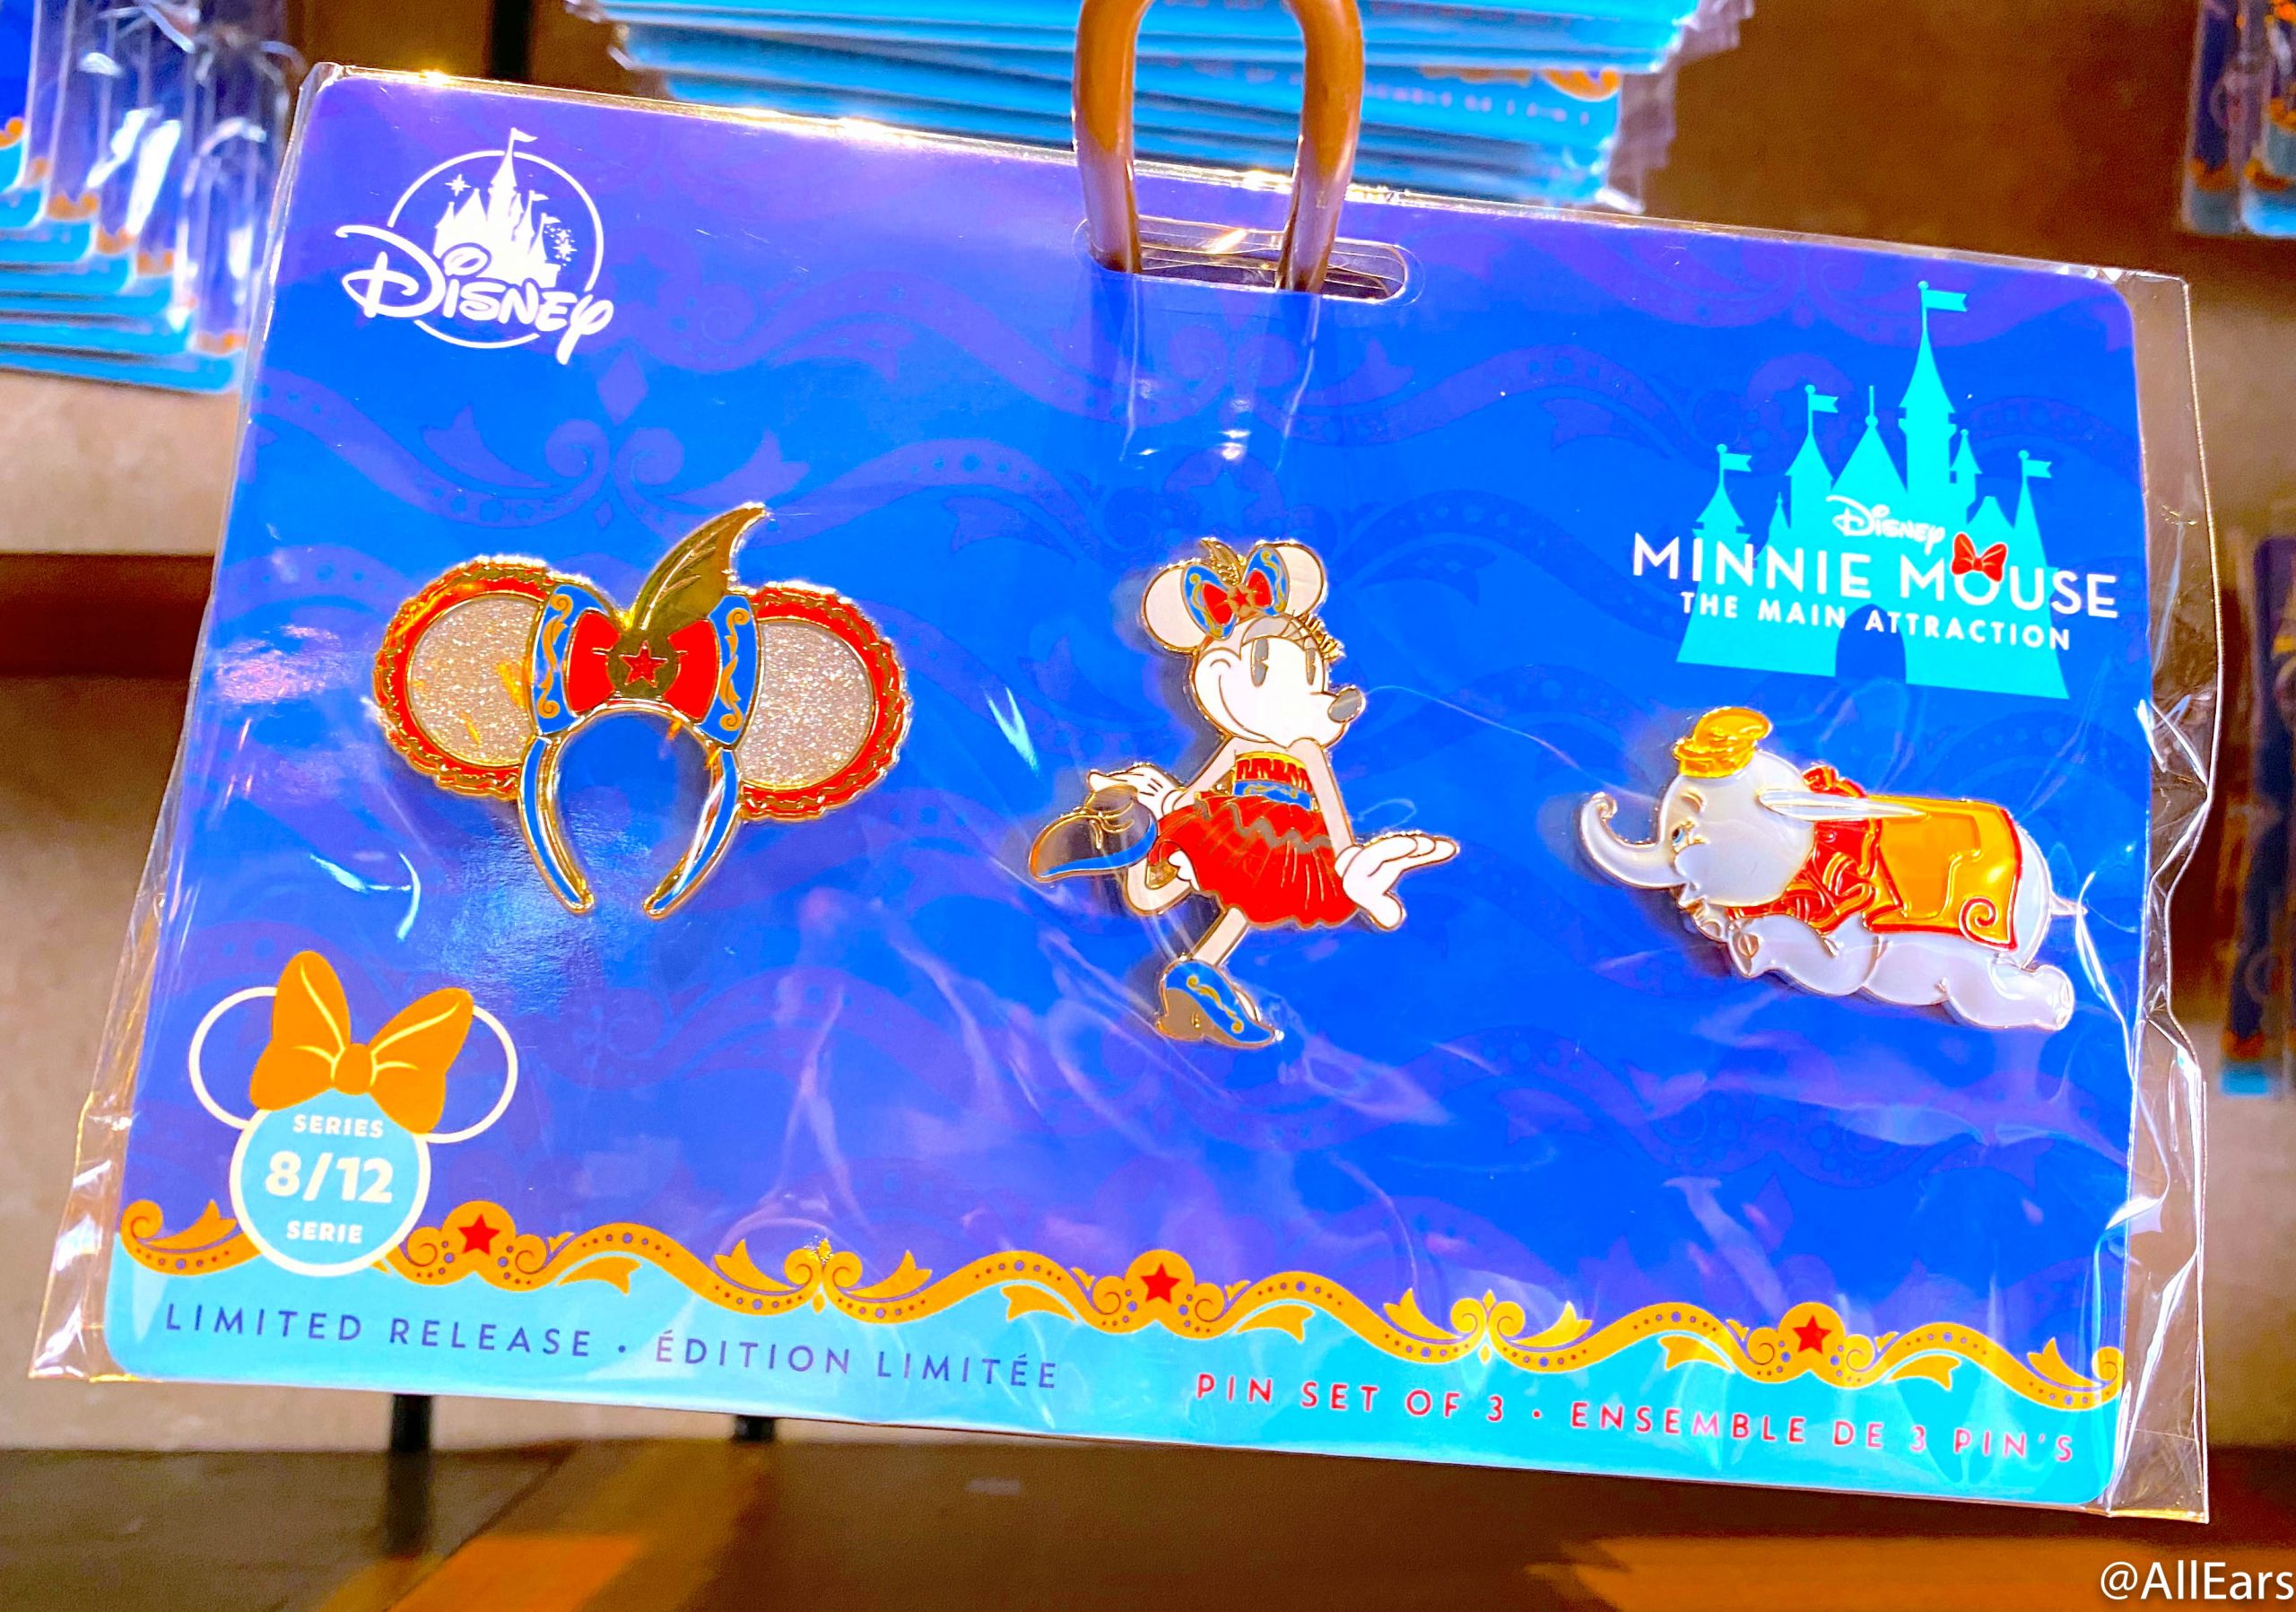 Disney Minnie Mouse Main Attraction Pin Set Of 3 Dumbo 8/12 